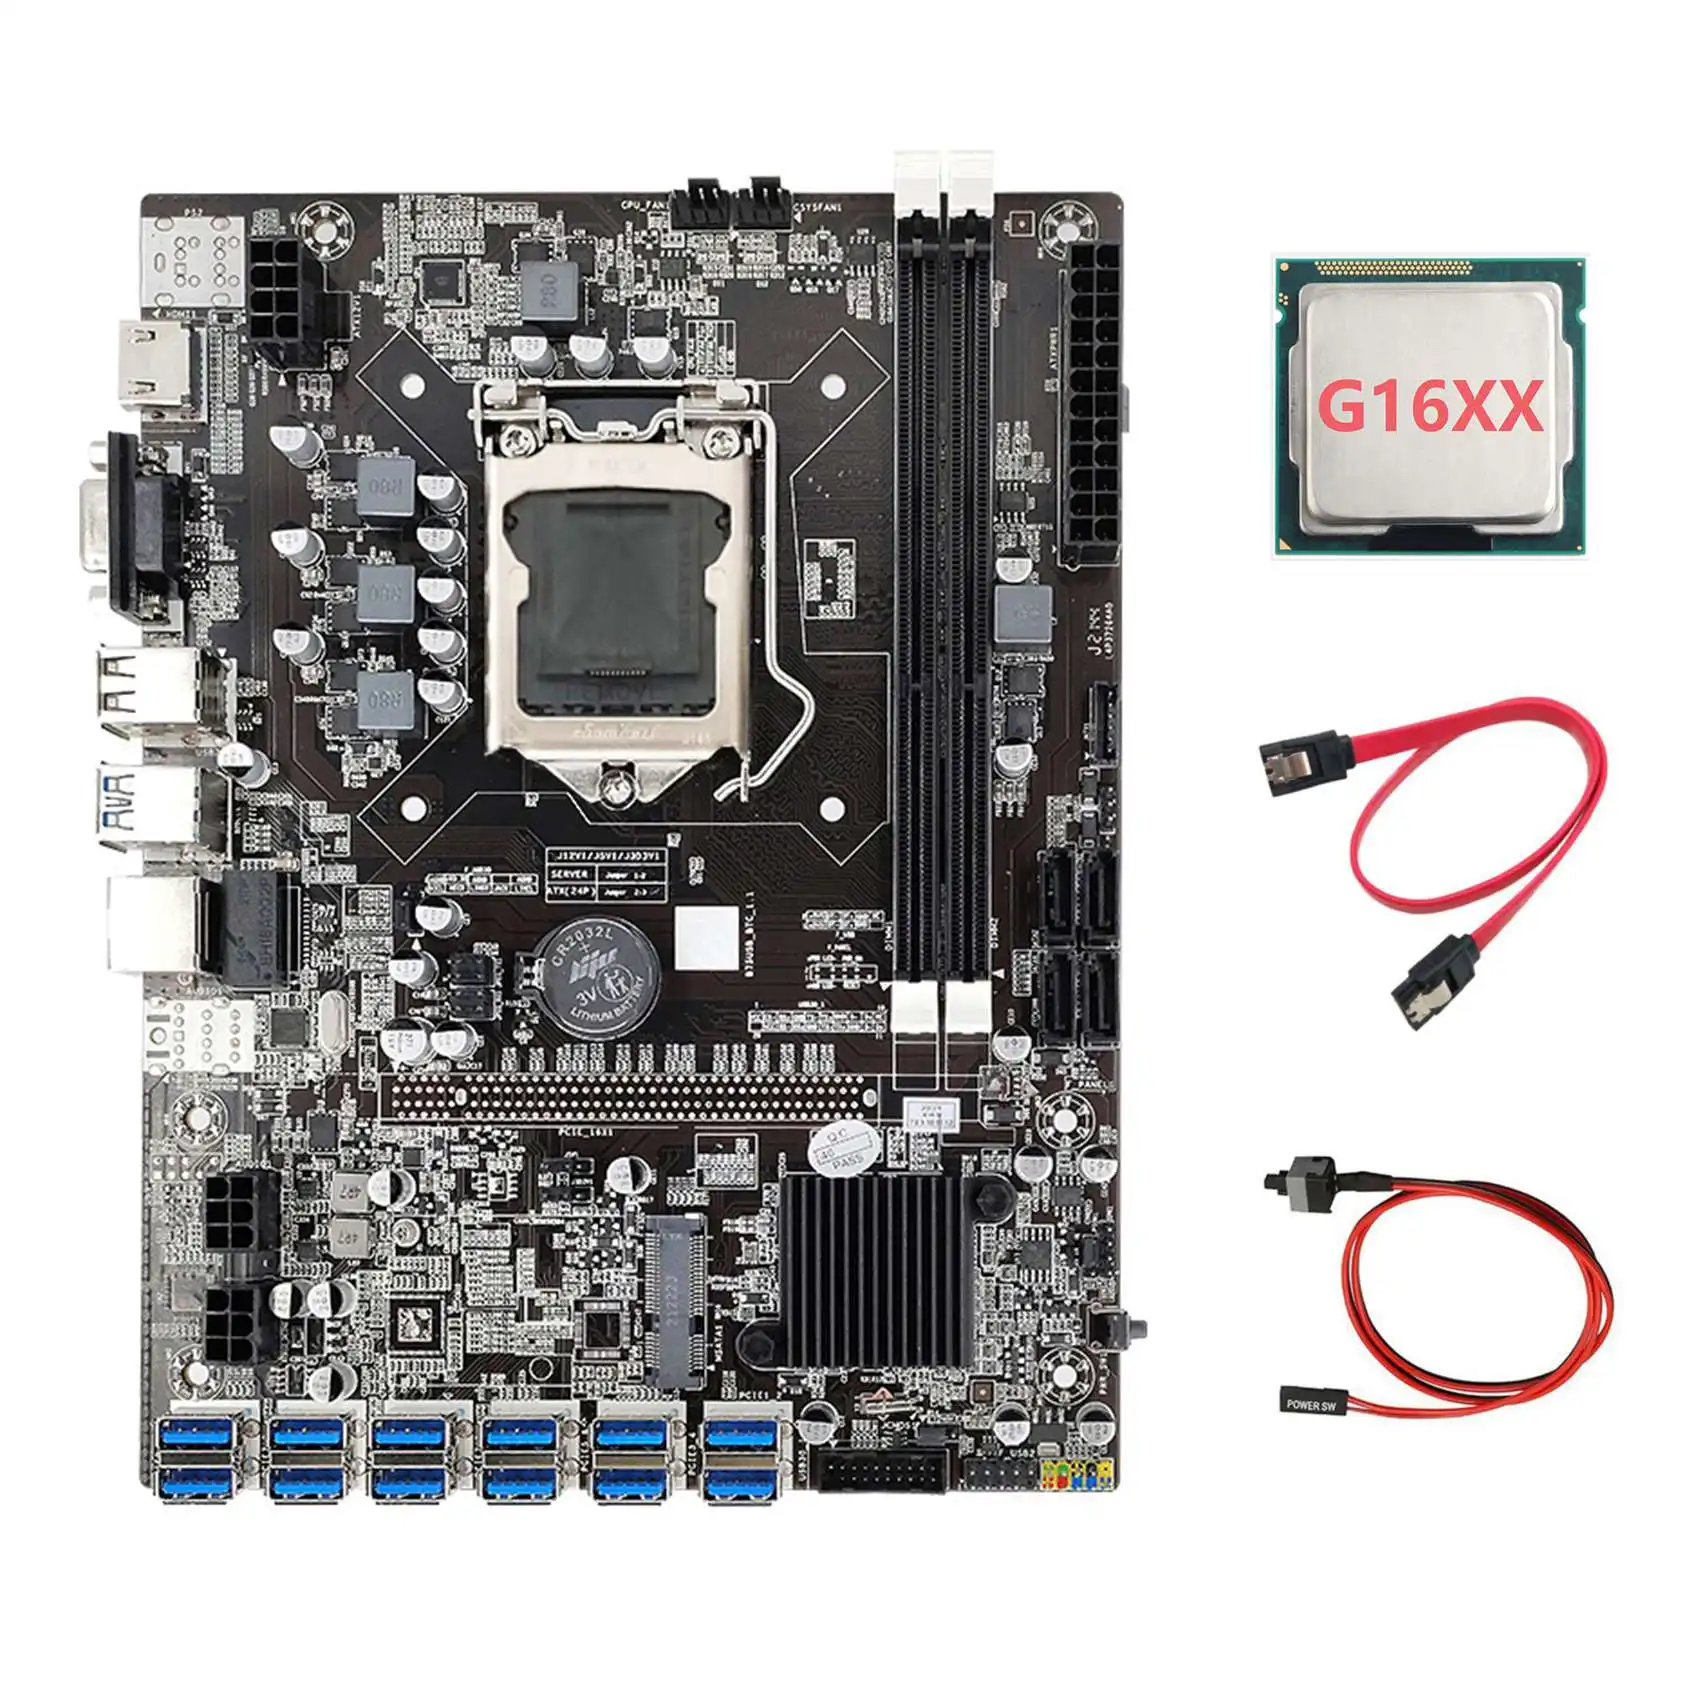 B75 ETH Mining Motherboard+G16XX CPU+Switch Cable+SATA Cable LGA1155 12 PCIE to USB MSATA DDR3 B75 USB BTC Motherboard